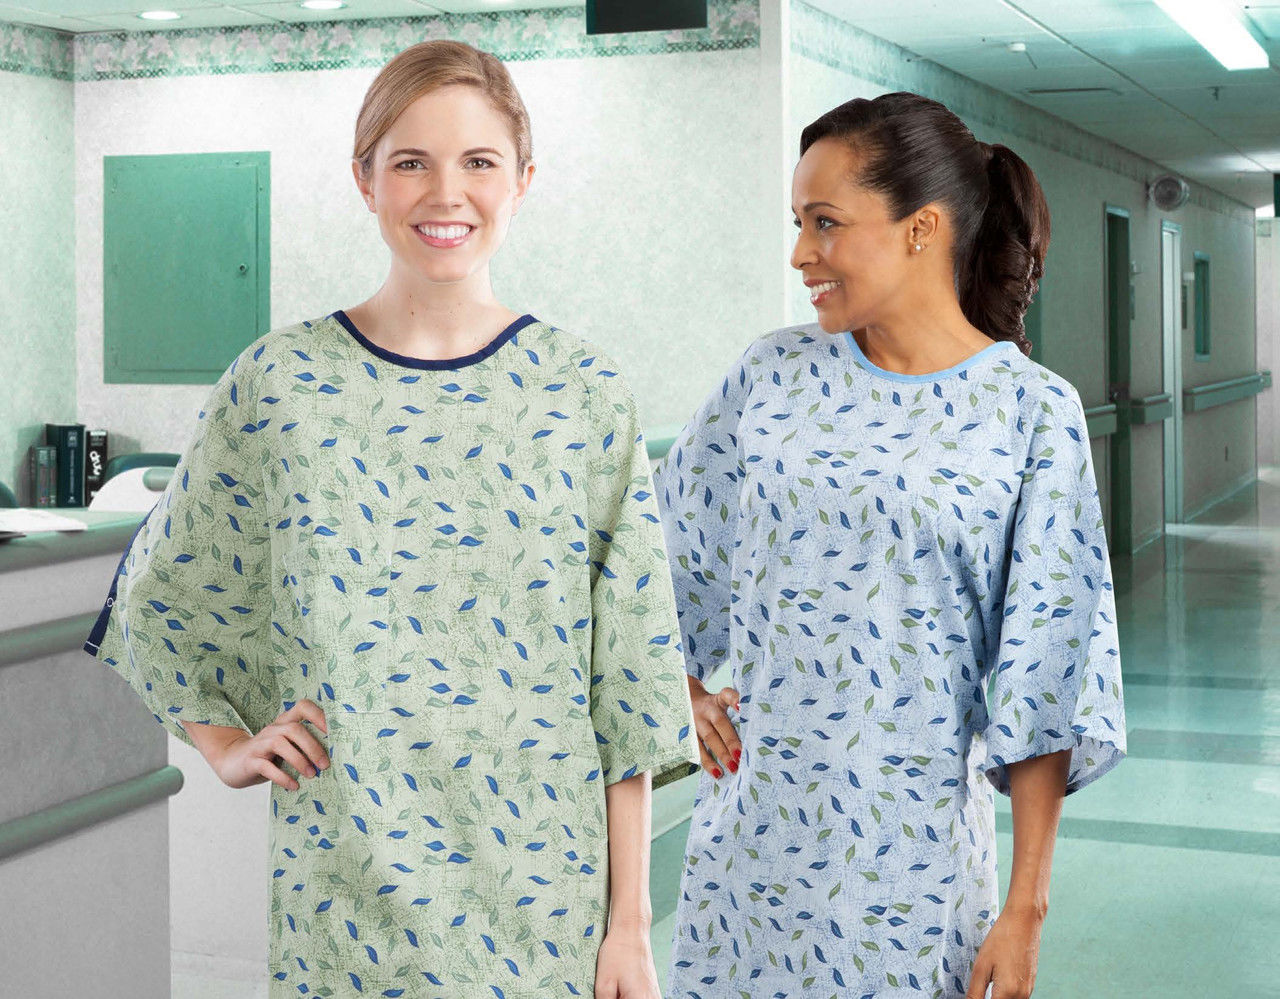 What do different color hospital gowns mean?